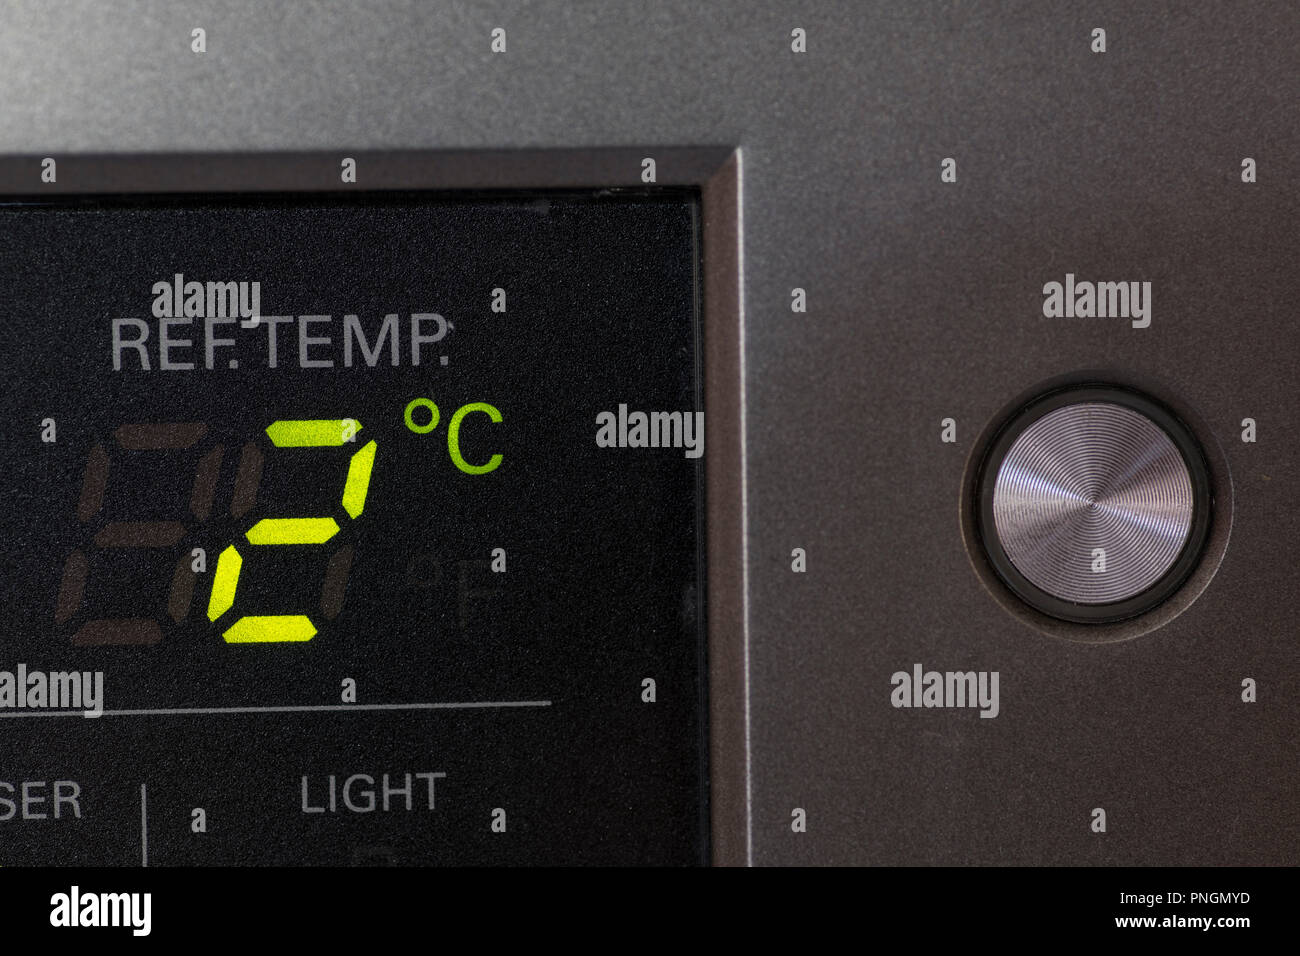 https://c8.alamy.com/comp/PNGMYD/fridge-digital-control-panel-with-temperature-of-fridge-at-2-degree-celsuis-and-the-push-button-to-control-it-PNGMYD.jpg